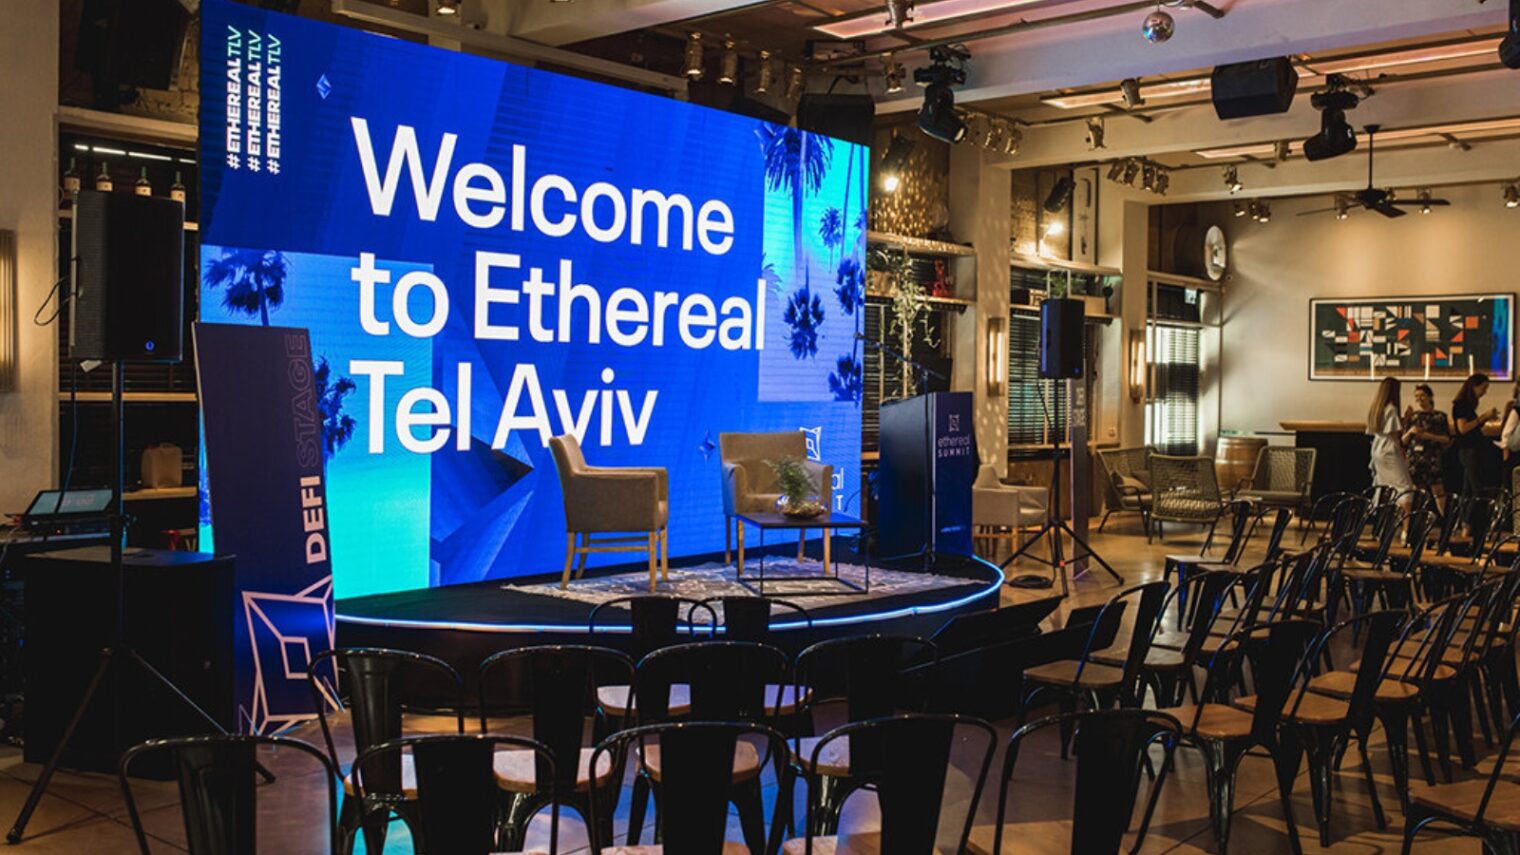 ConsenSys held the Ethereal international summit in Tel Aviv, September 2019. Photo by Menash Cohen